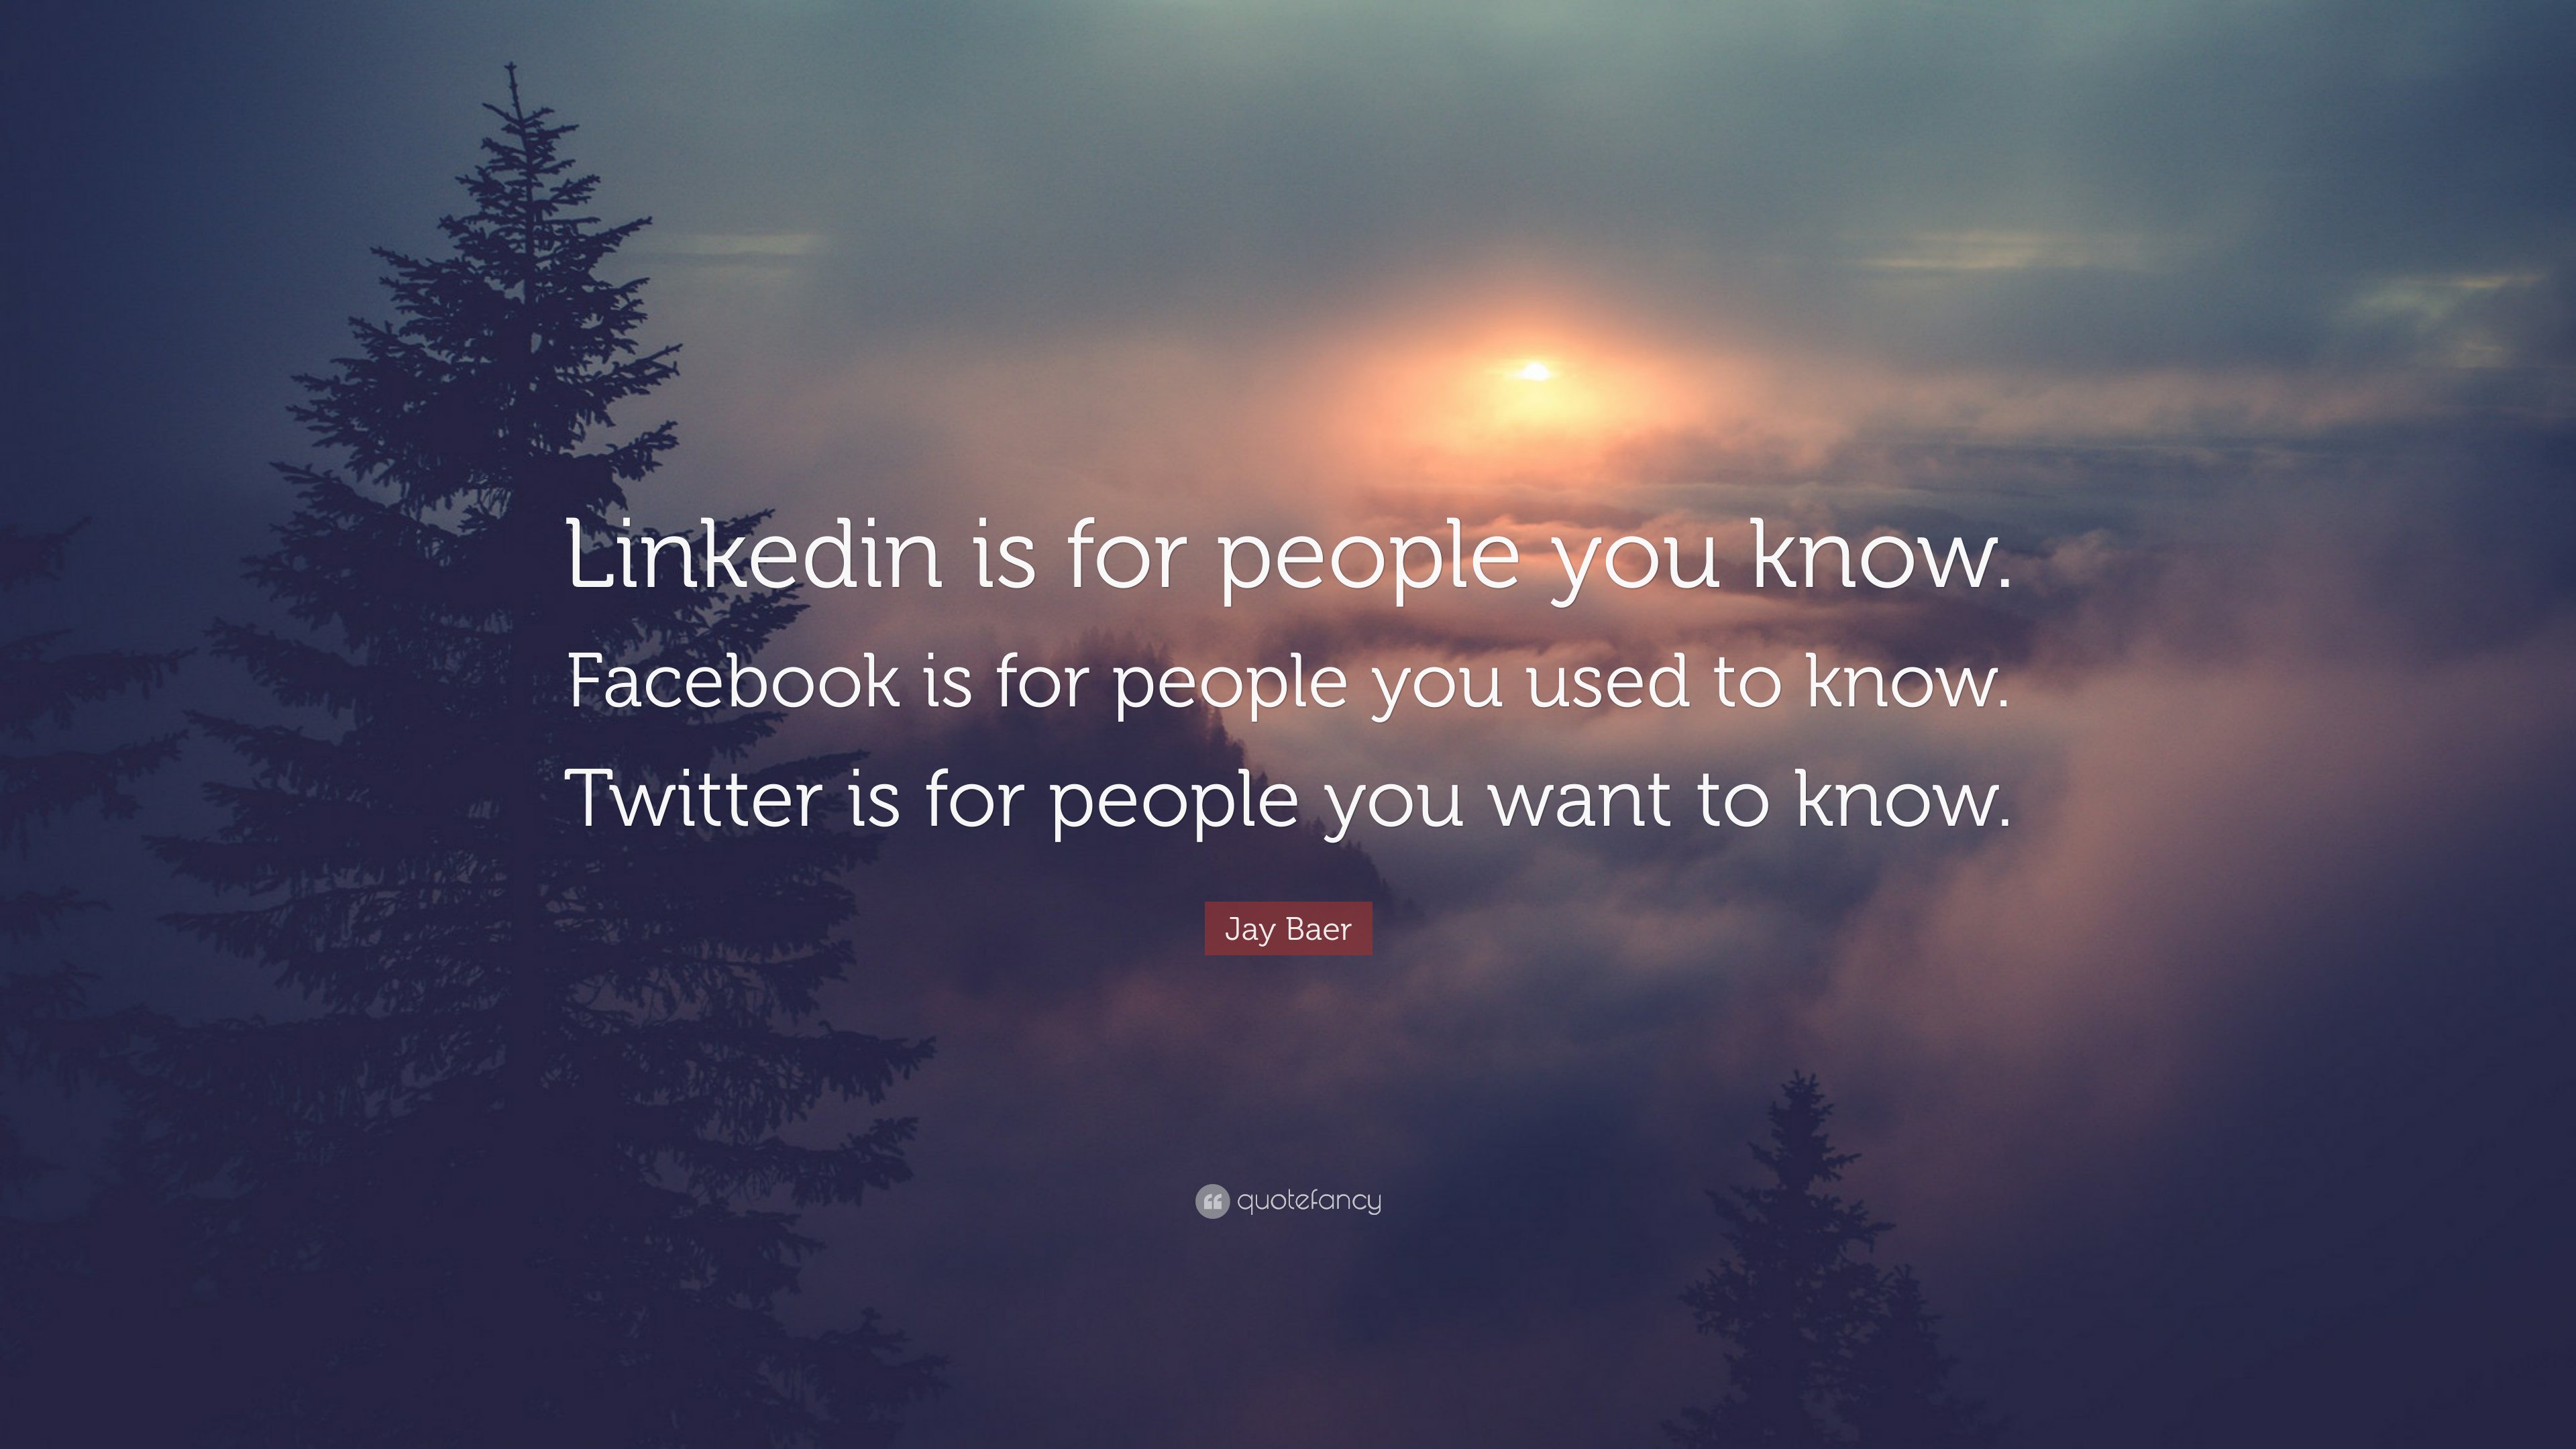 Jay Baer Quote: “Linkedin is for people you know. Facebook is